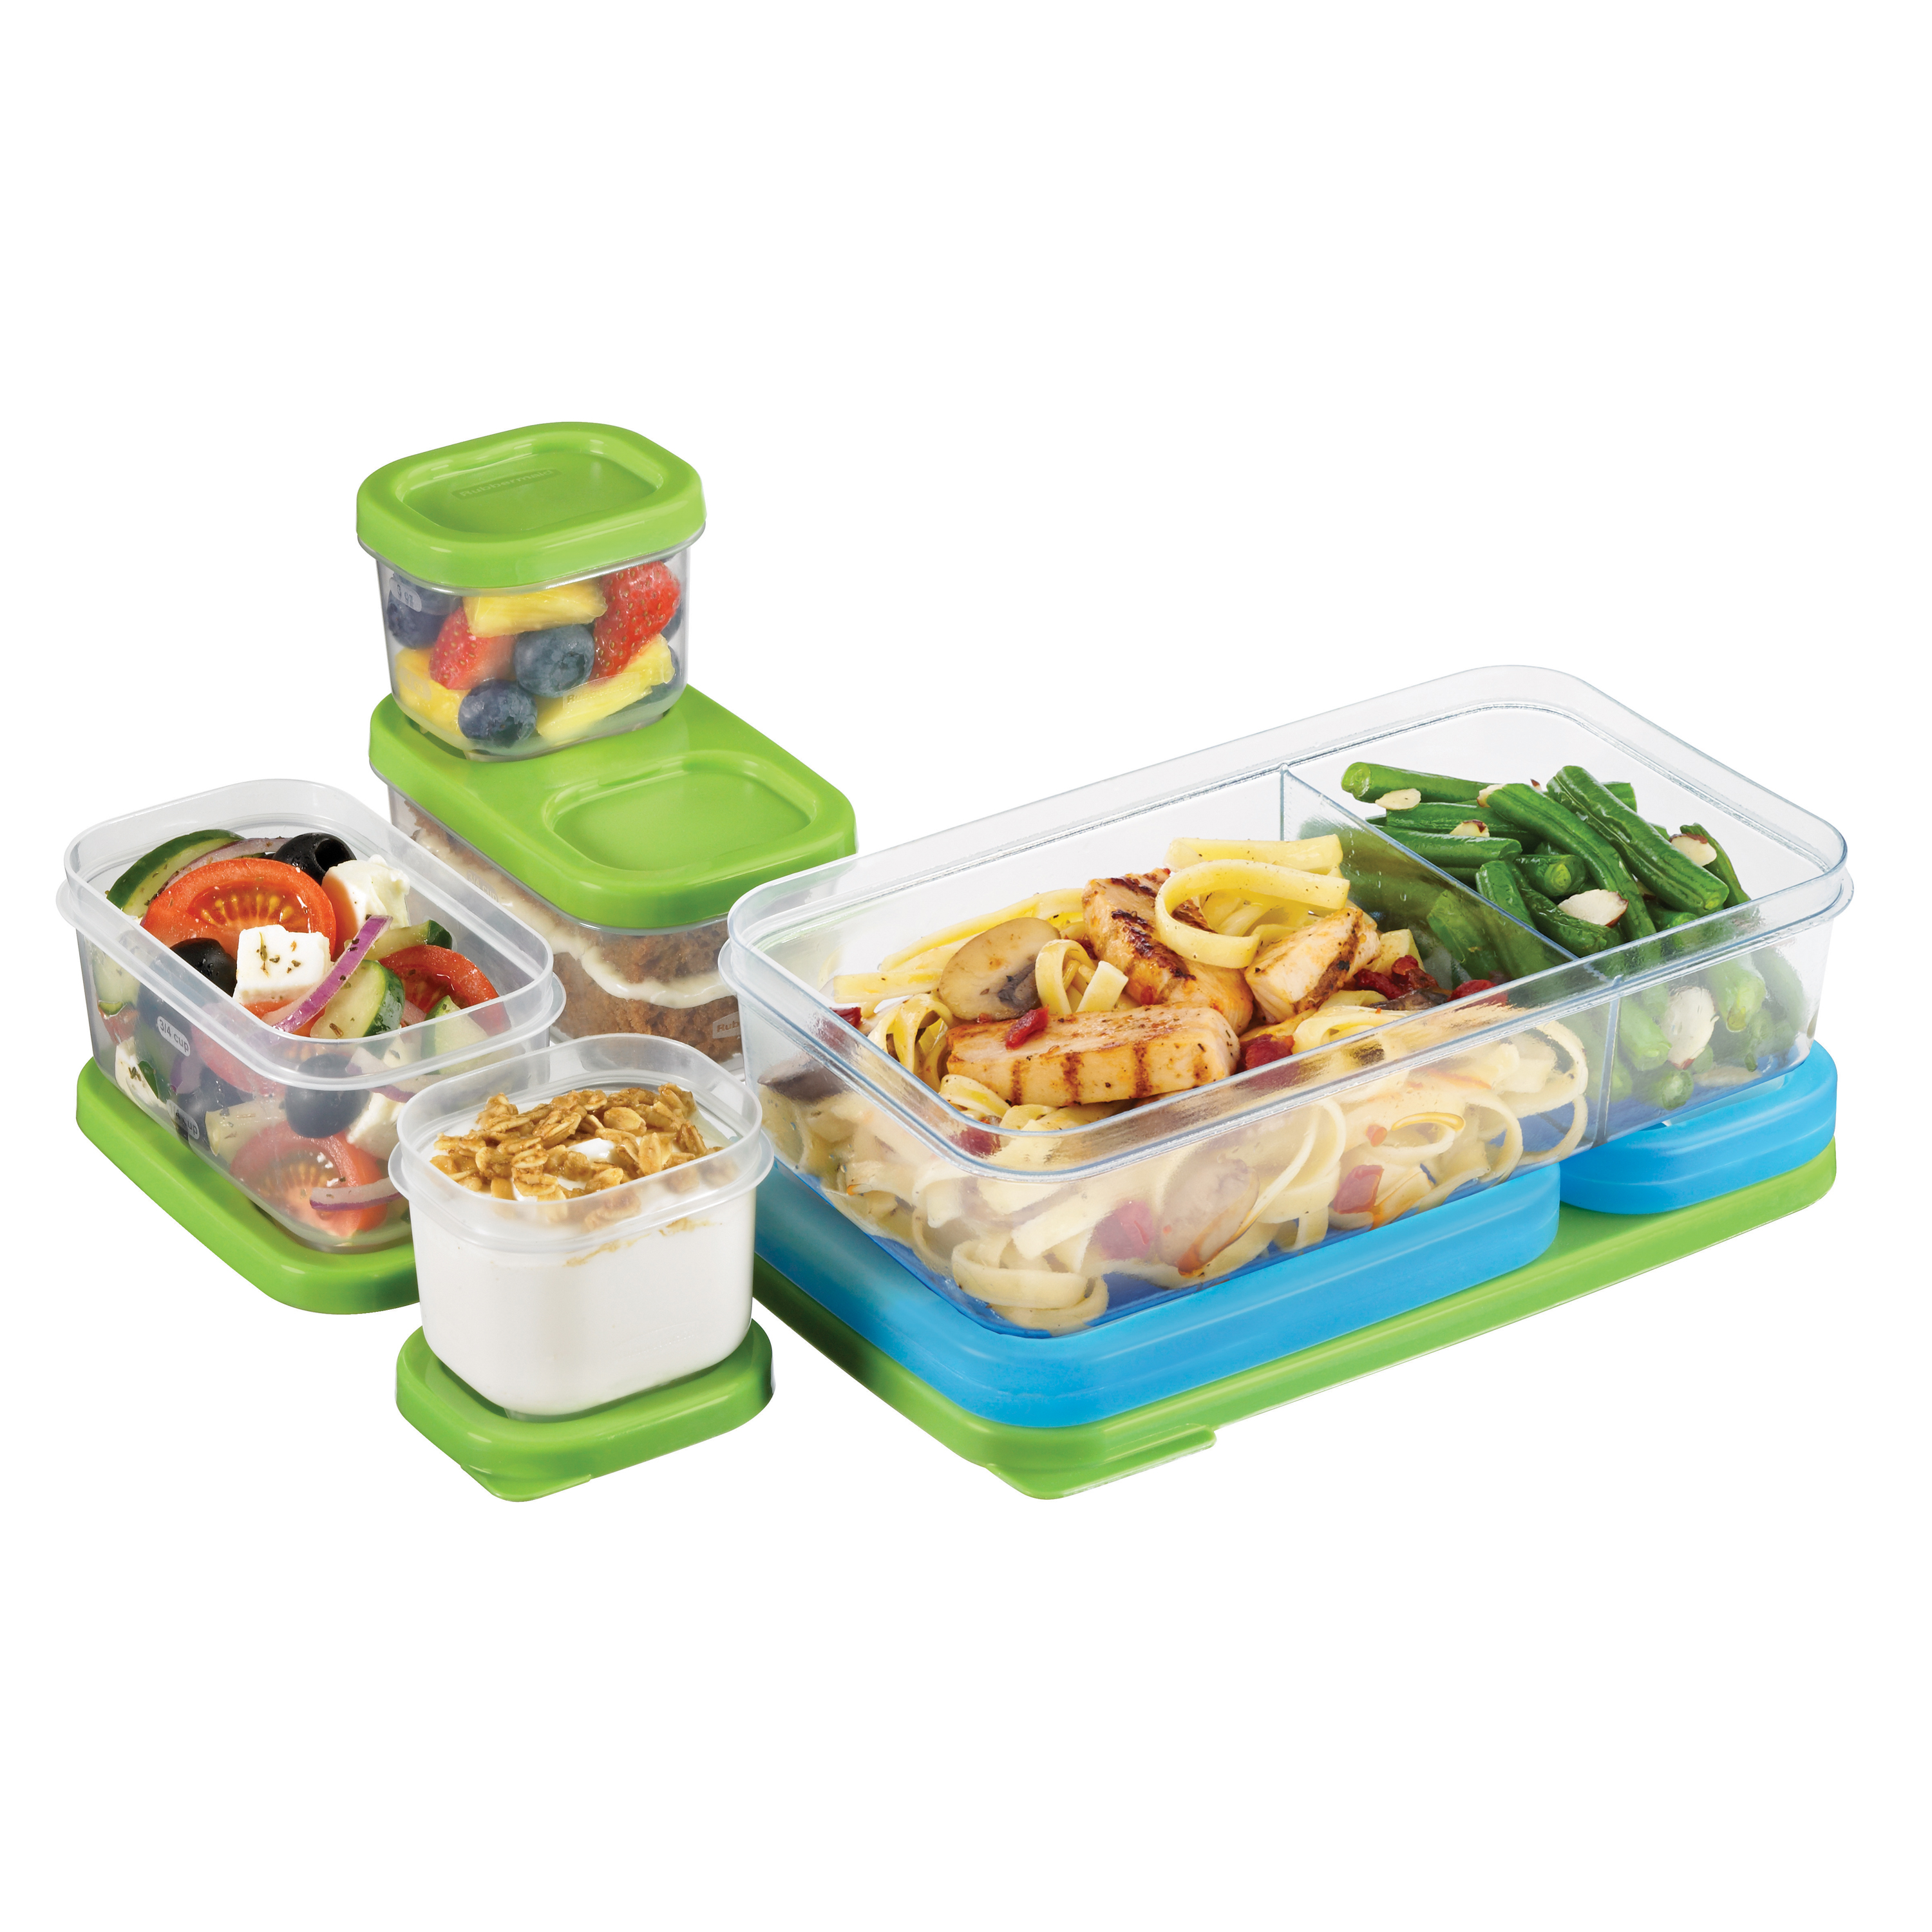 Rubbermaid LunchBlox 7-Piece Modular Entree Food Containers with Blue Ice Snap-Ins - image 4 of 4